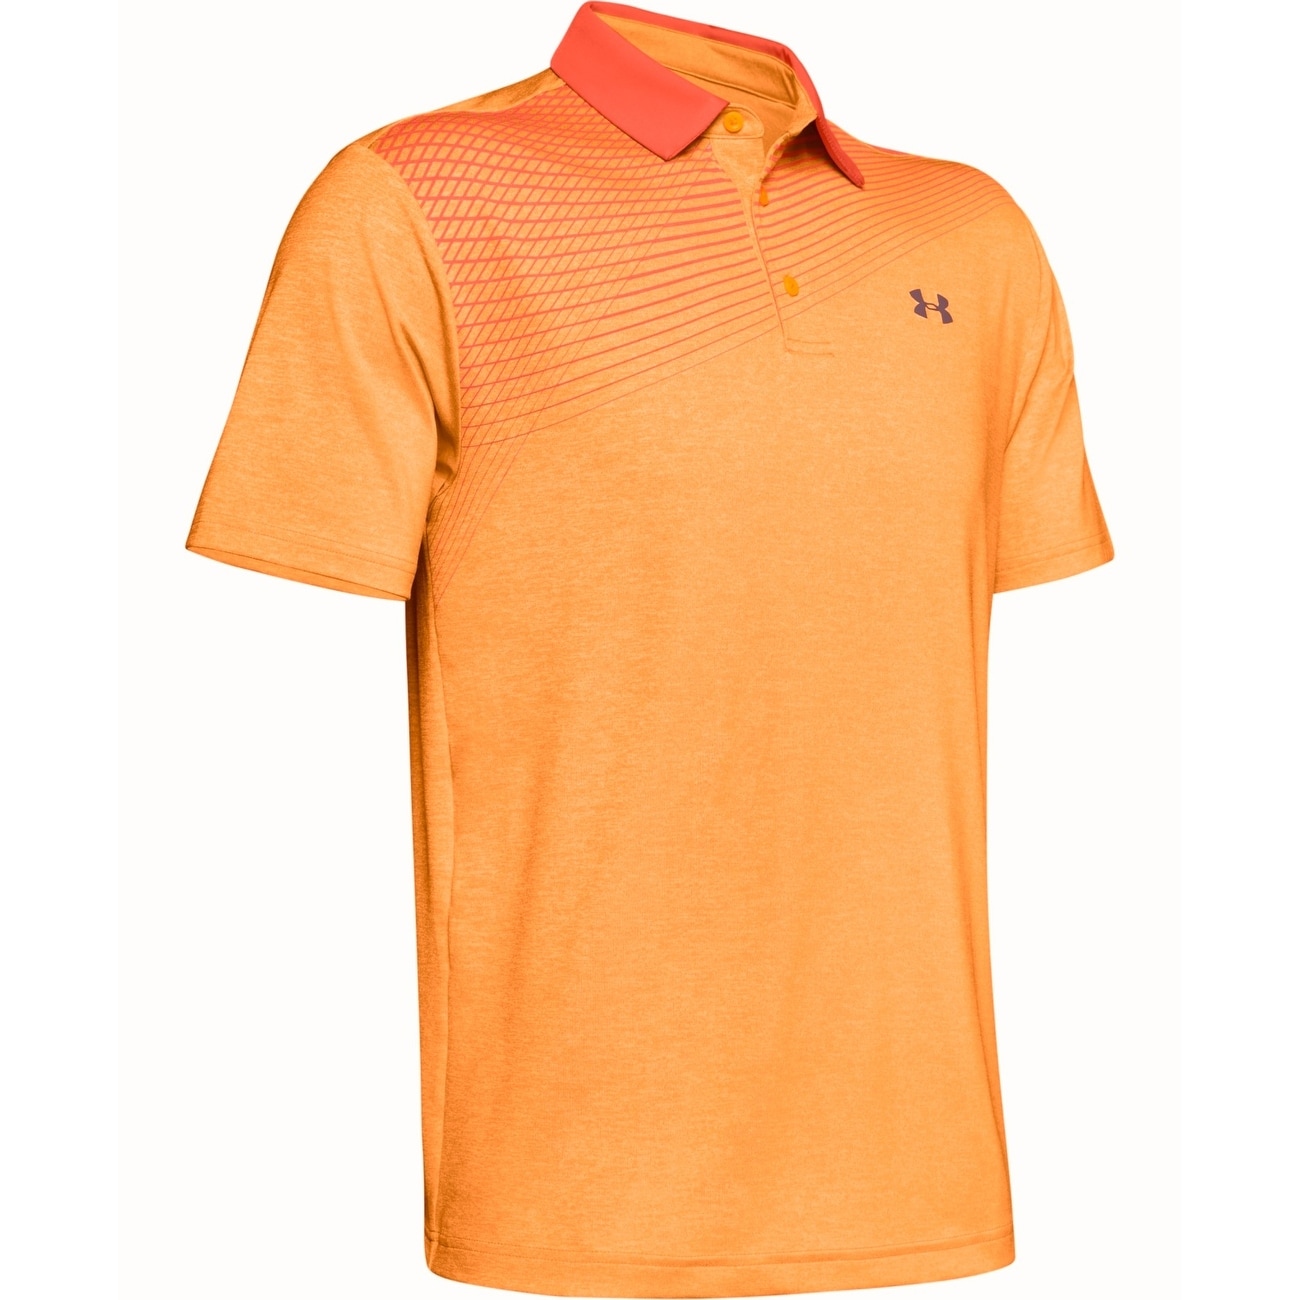 under armour polo playoff